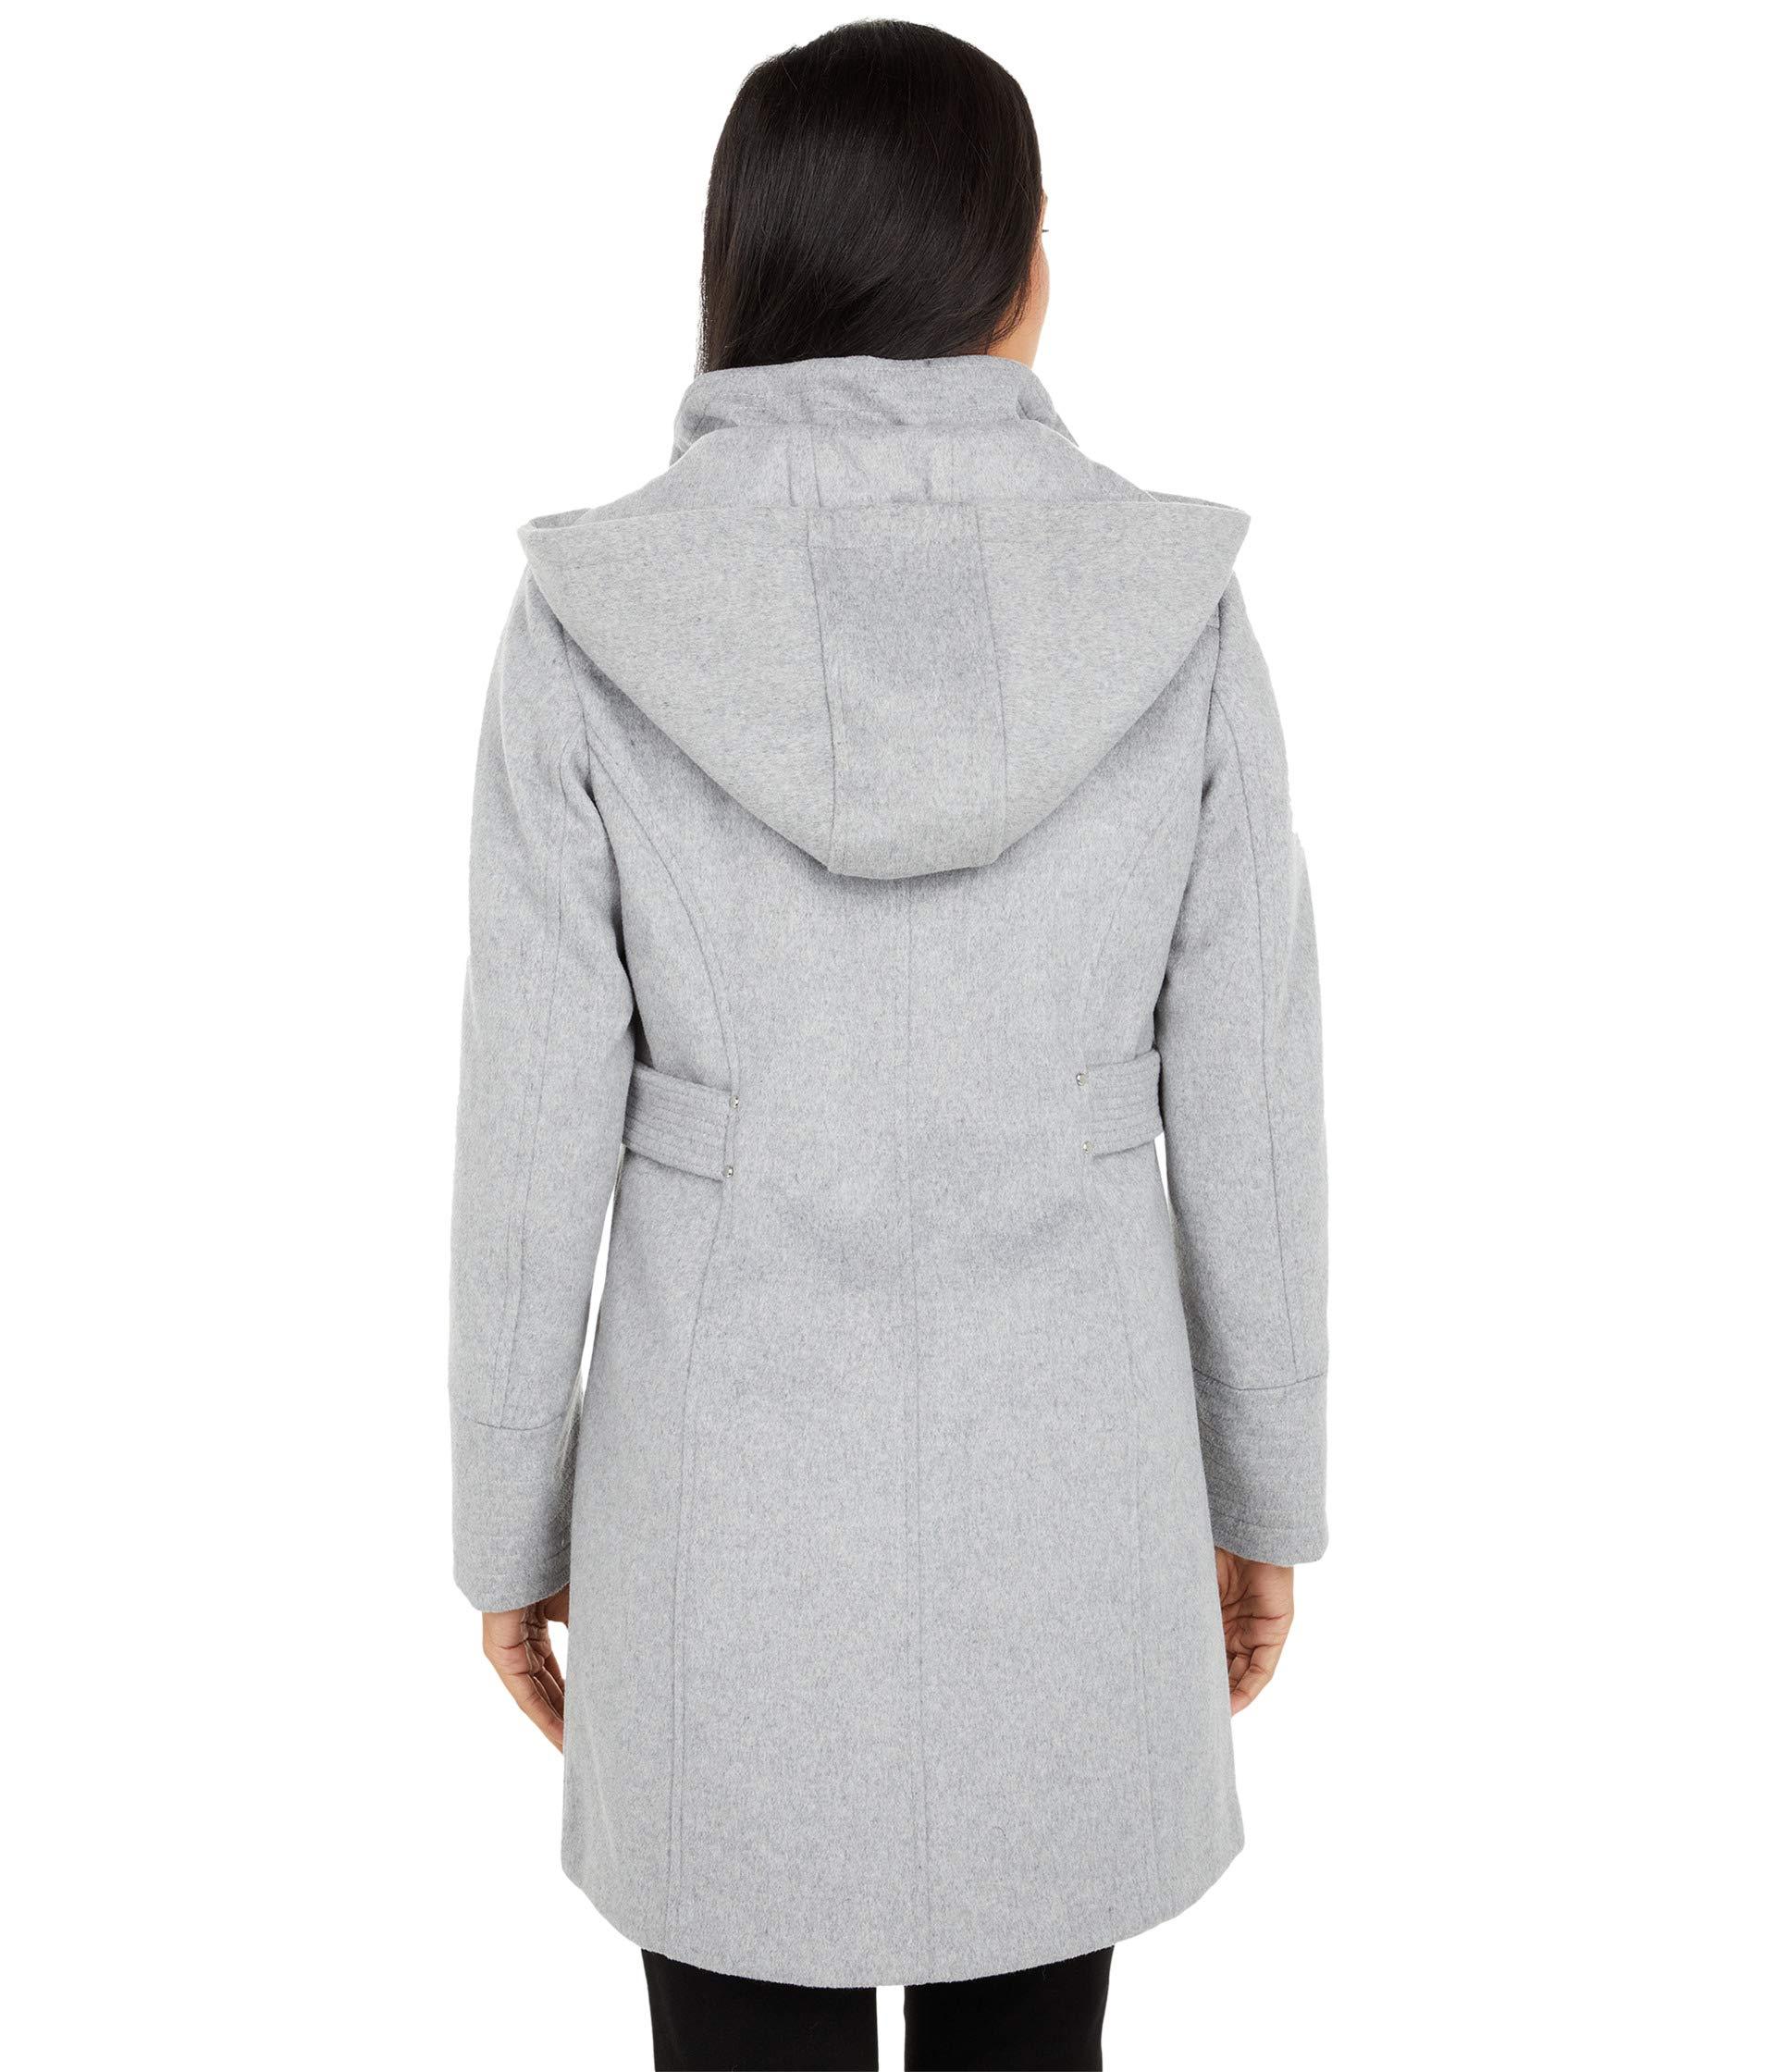 Vince Camuto Hooded Wool Coat V20770-za in Gray - Lyst